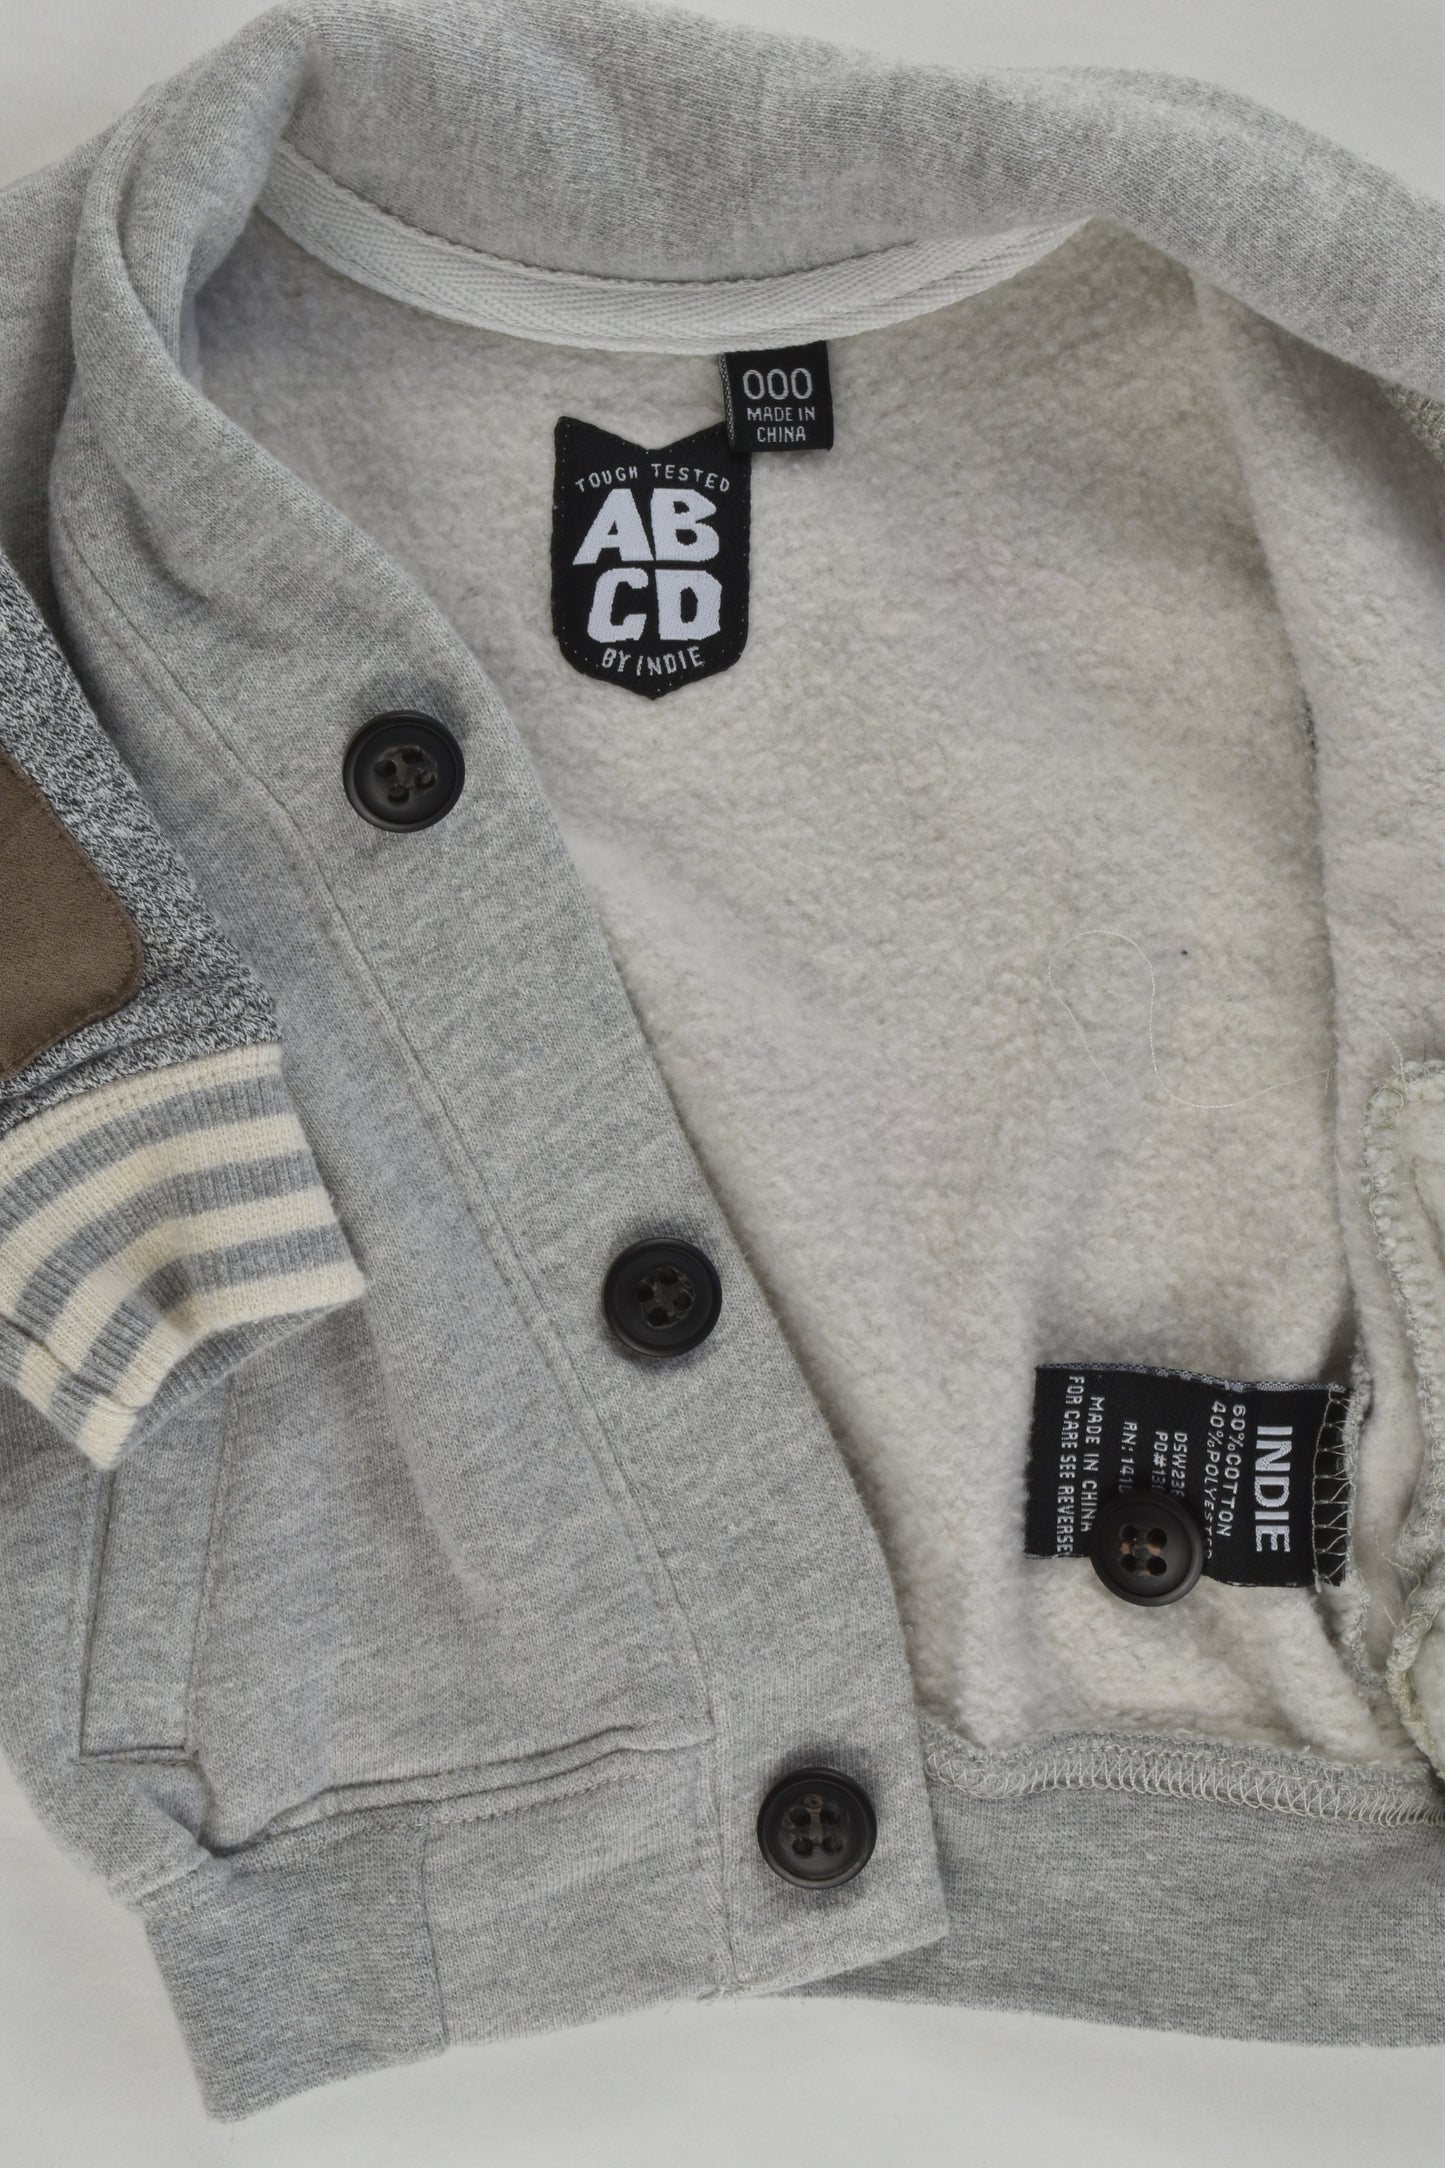 ABCD by Indie Size 000 Sweater Cardigan